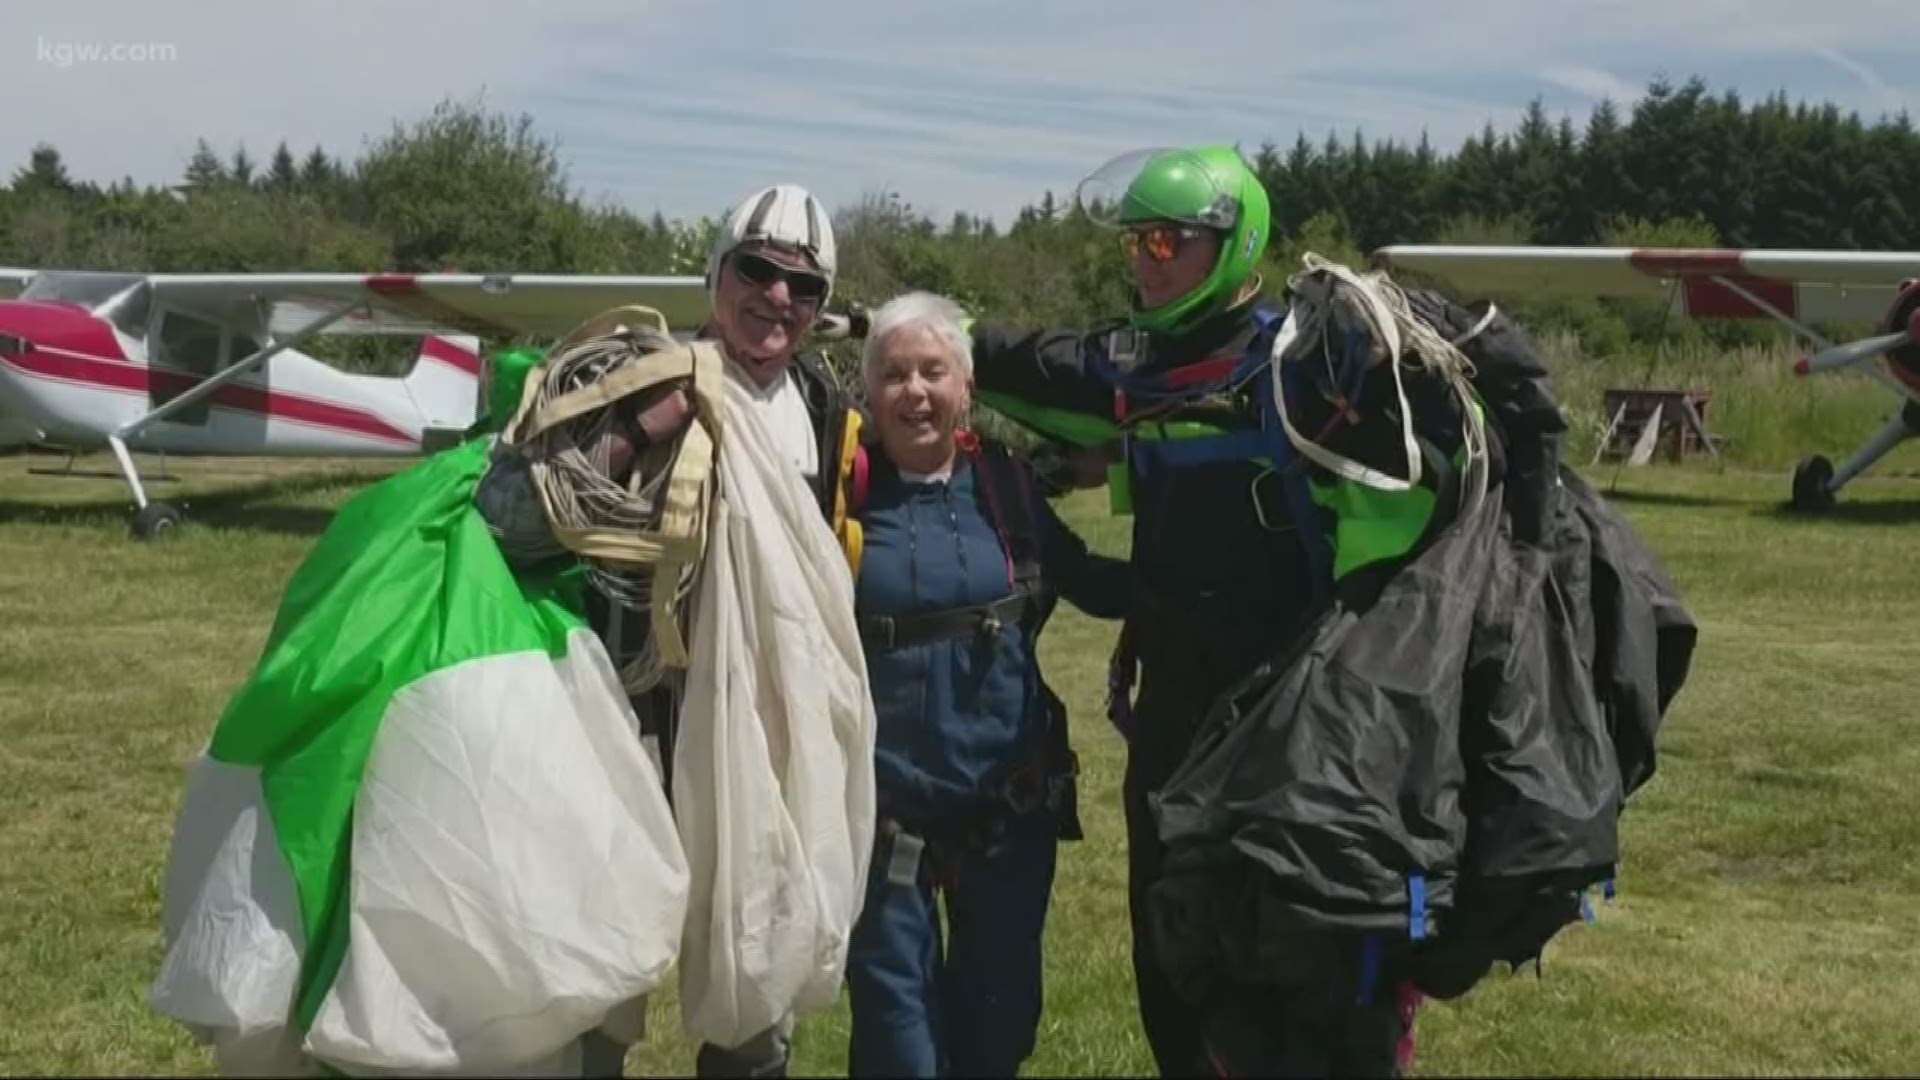 Shirley Romig, a Battle Ground, Washington woman, went skydiving for her 73rd birthday to raise money for an organization that pairs veterans in need with service dogs.